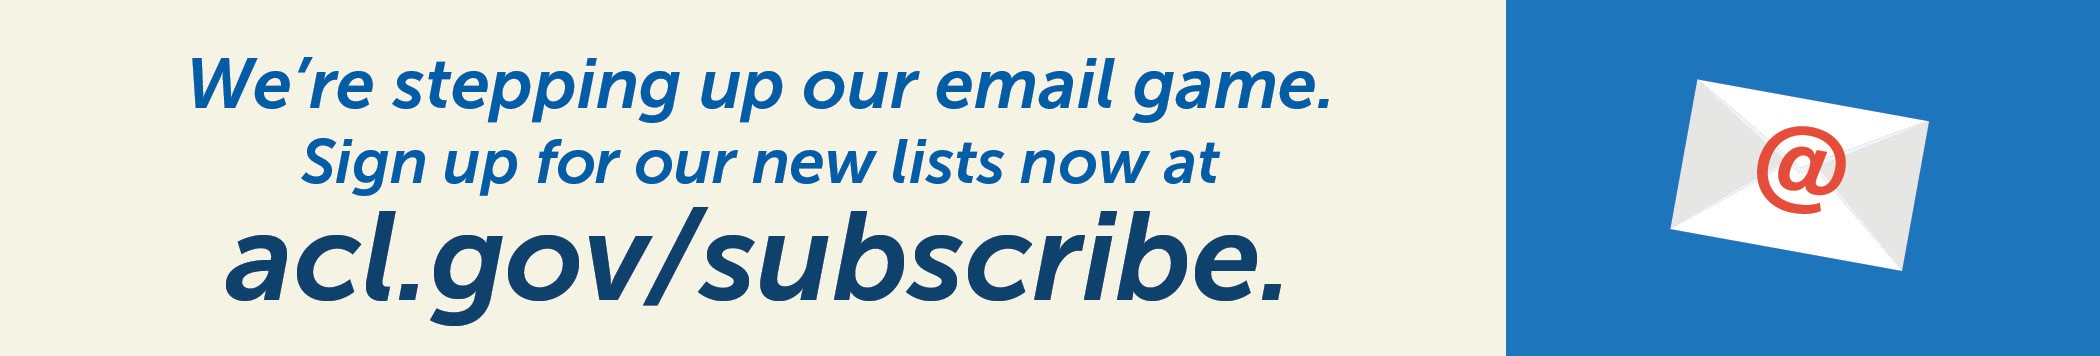 We're stepping up our email game. Sign up for our new lists at acl.gov/subscribe